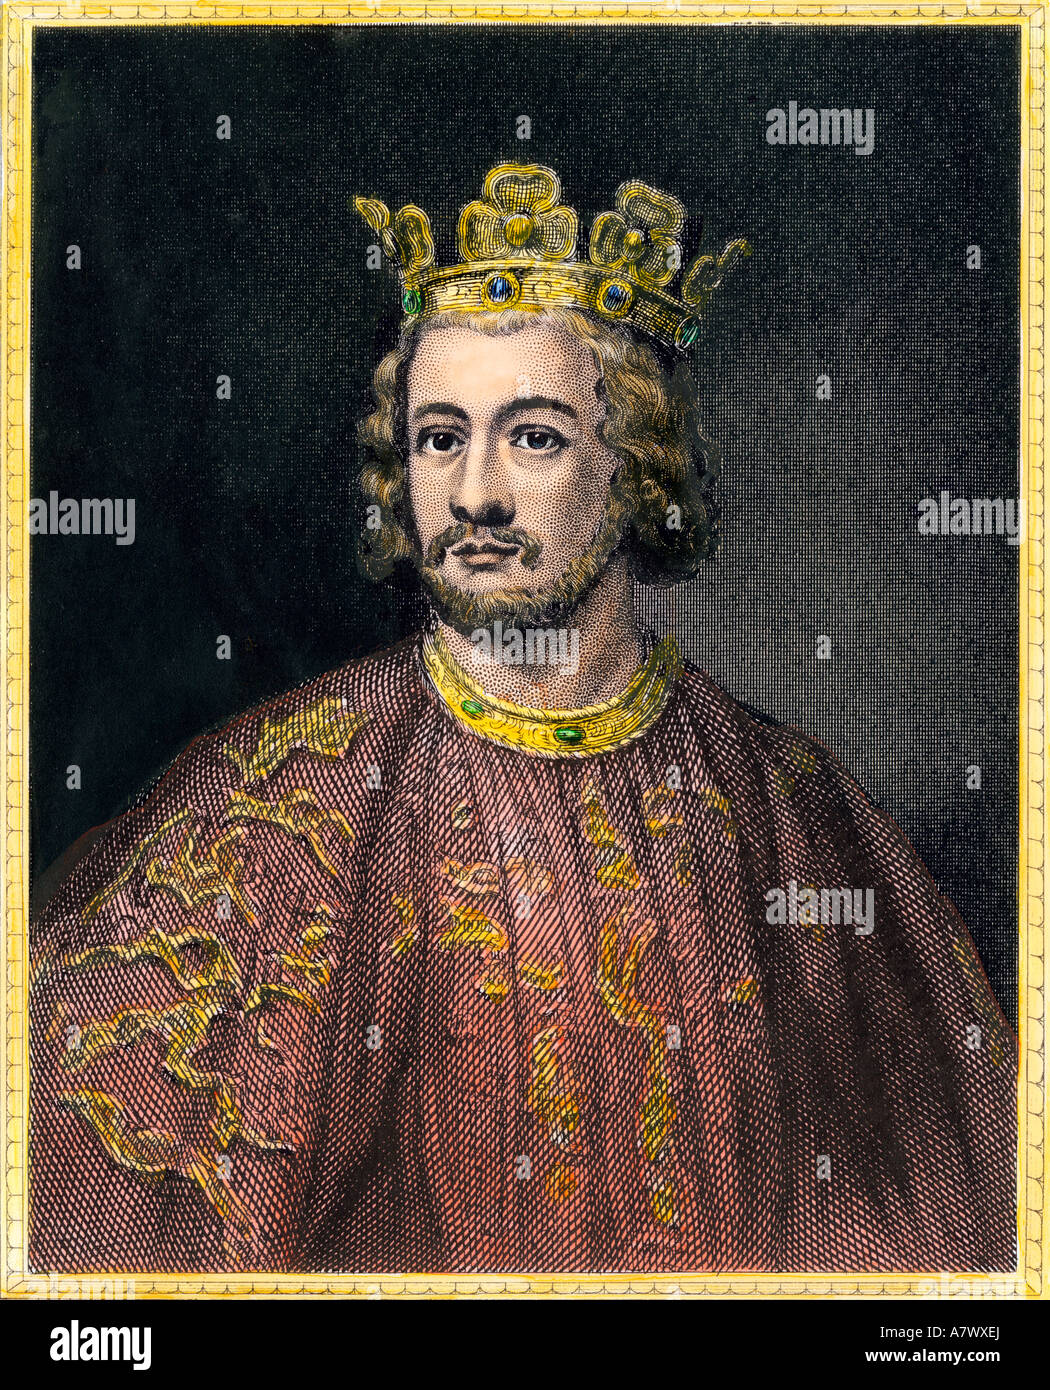 John Lackland King of England who endorsed the Magna Carta in 1215. Hand-colored engraving Stock Photo